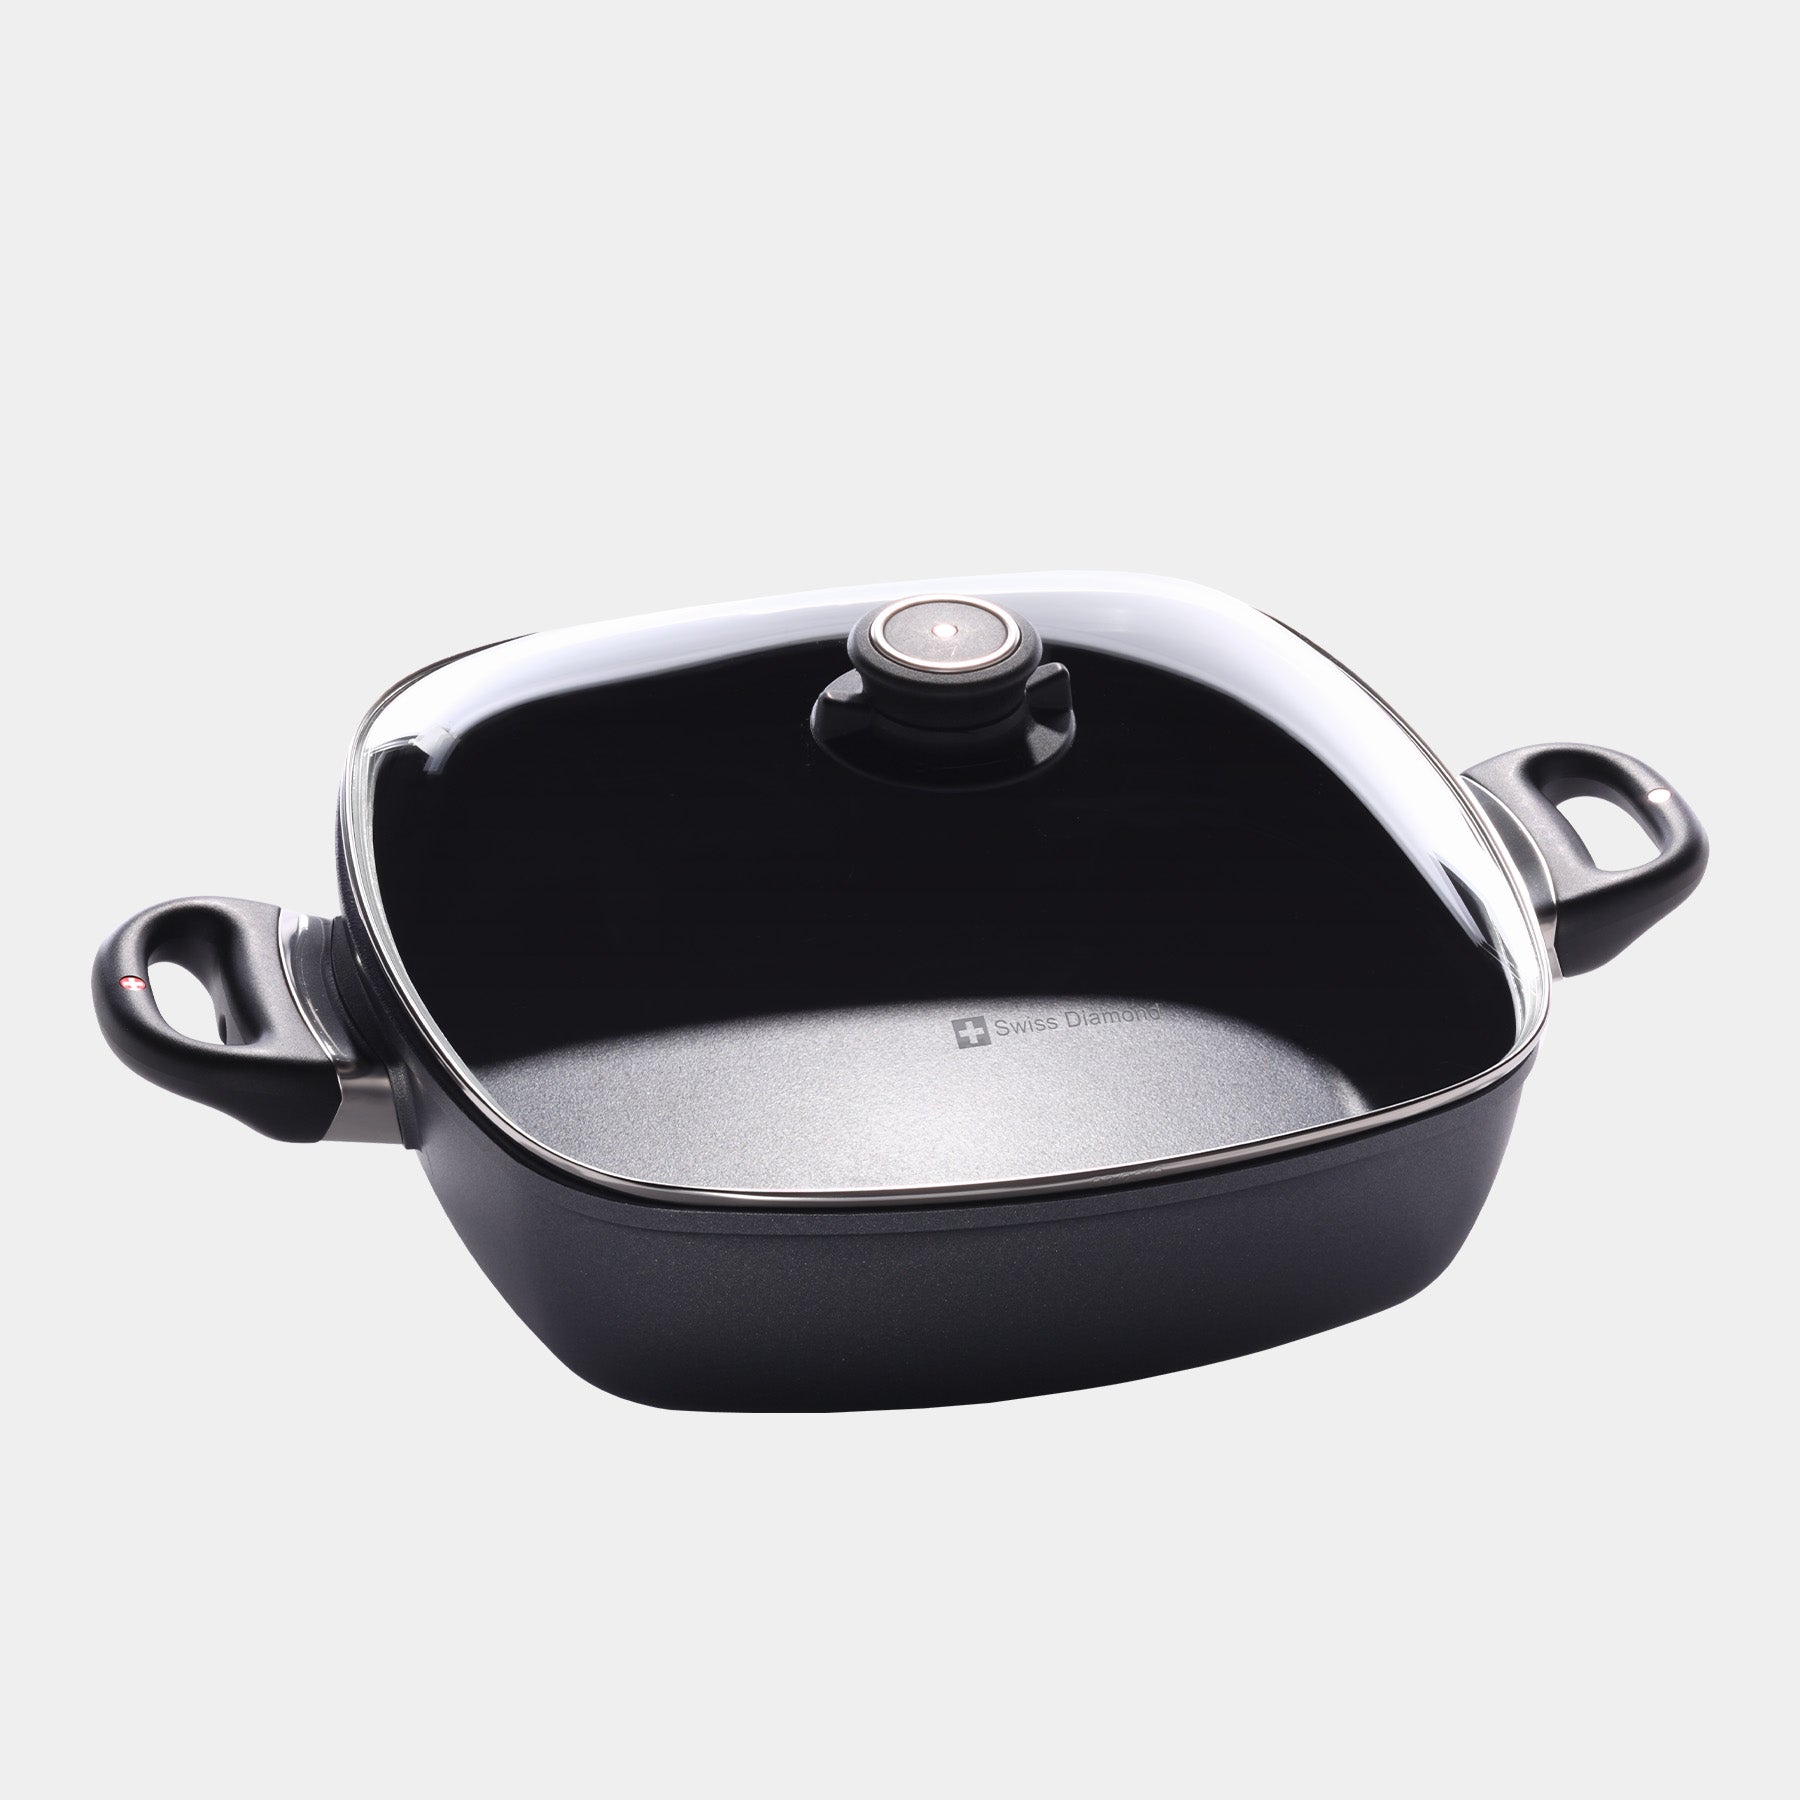 HD Nonstick 5 qt Square Casserole with Glass Lid - Induction